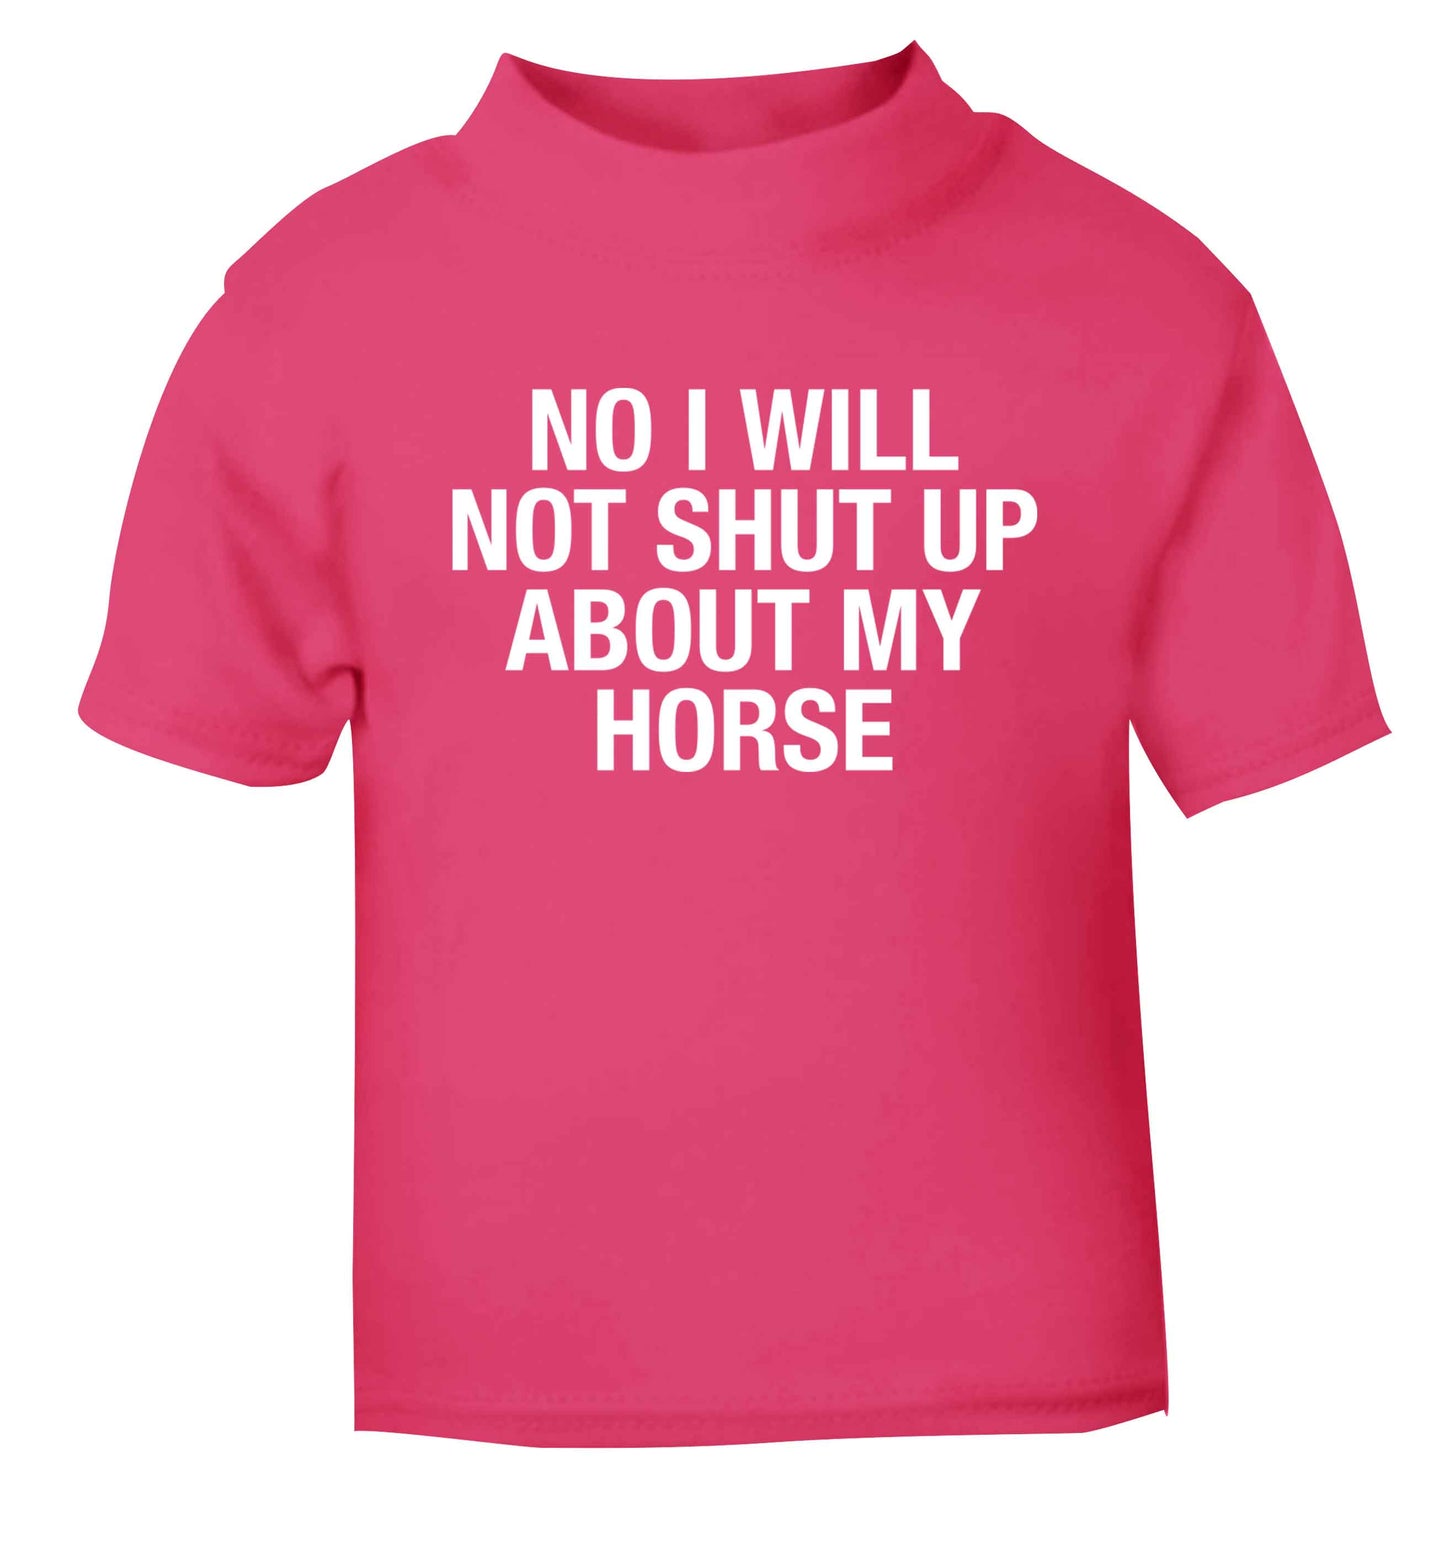 No I will not shut up talking about my horse pink baby toddler Tshirt 2 Years